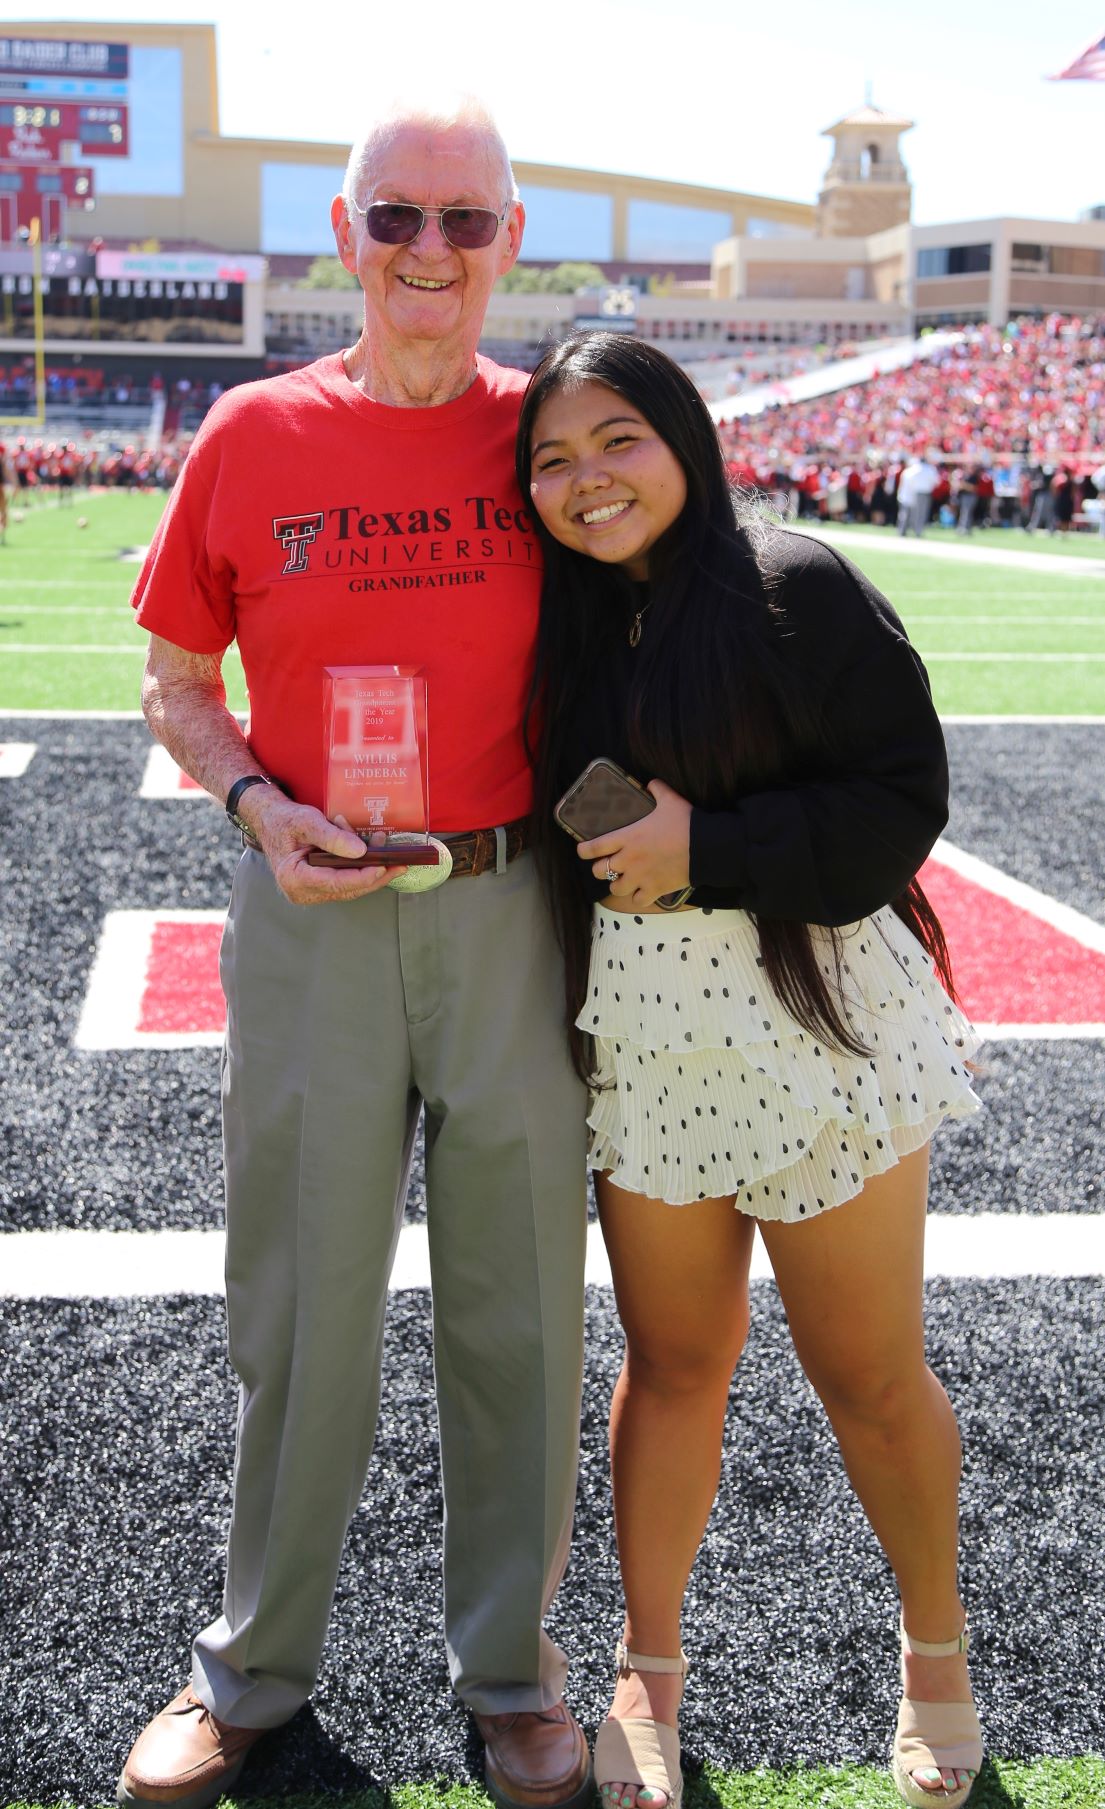 Grandparents of the Year awarded plaque during the Family Weekend football game